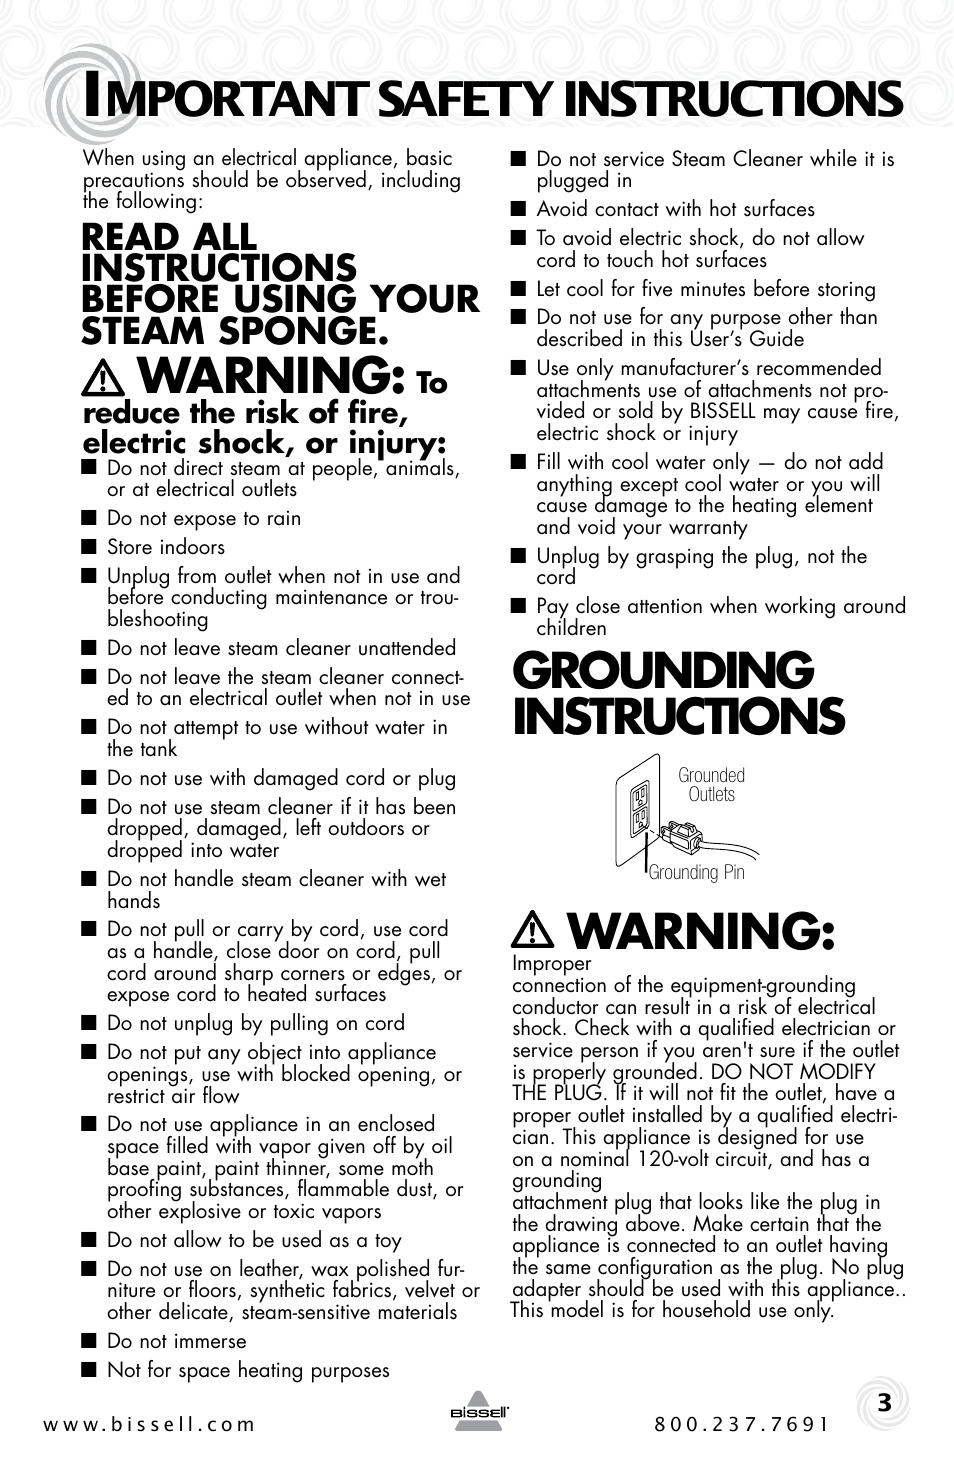 Mportant safety instructions, Warning, Grounding instructions warning | Bissell STEAM SPONGE 39F1 User Manual | Page 3 / 8